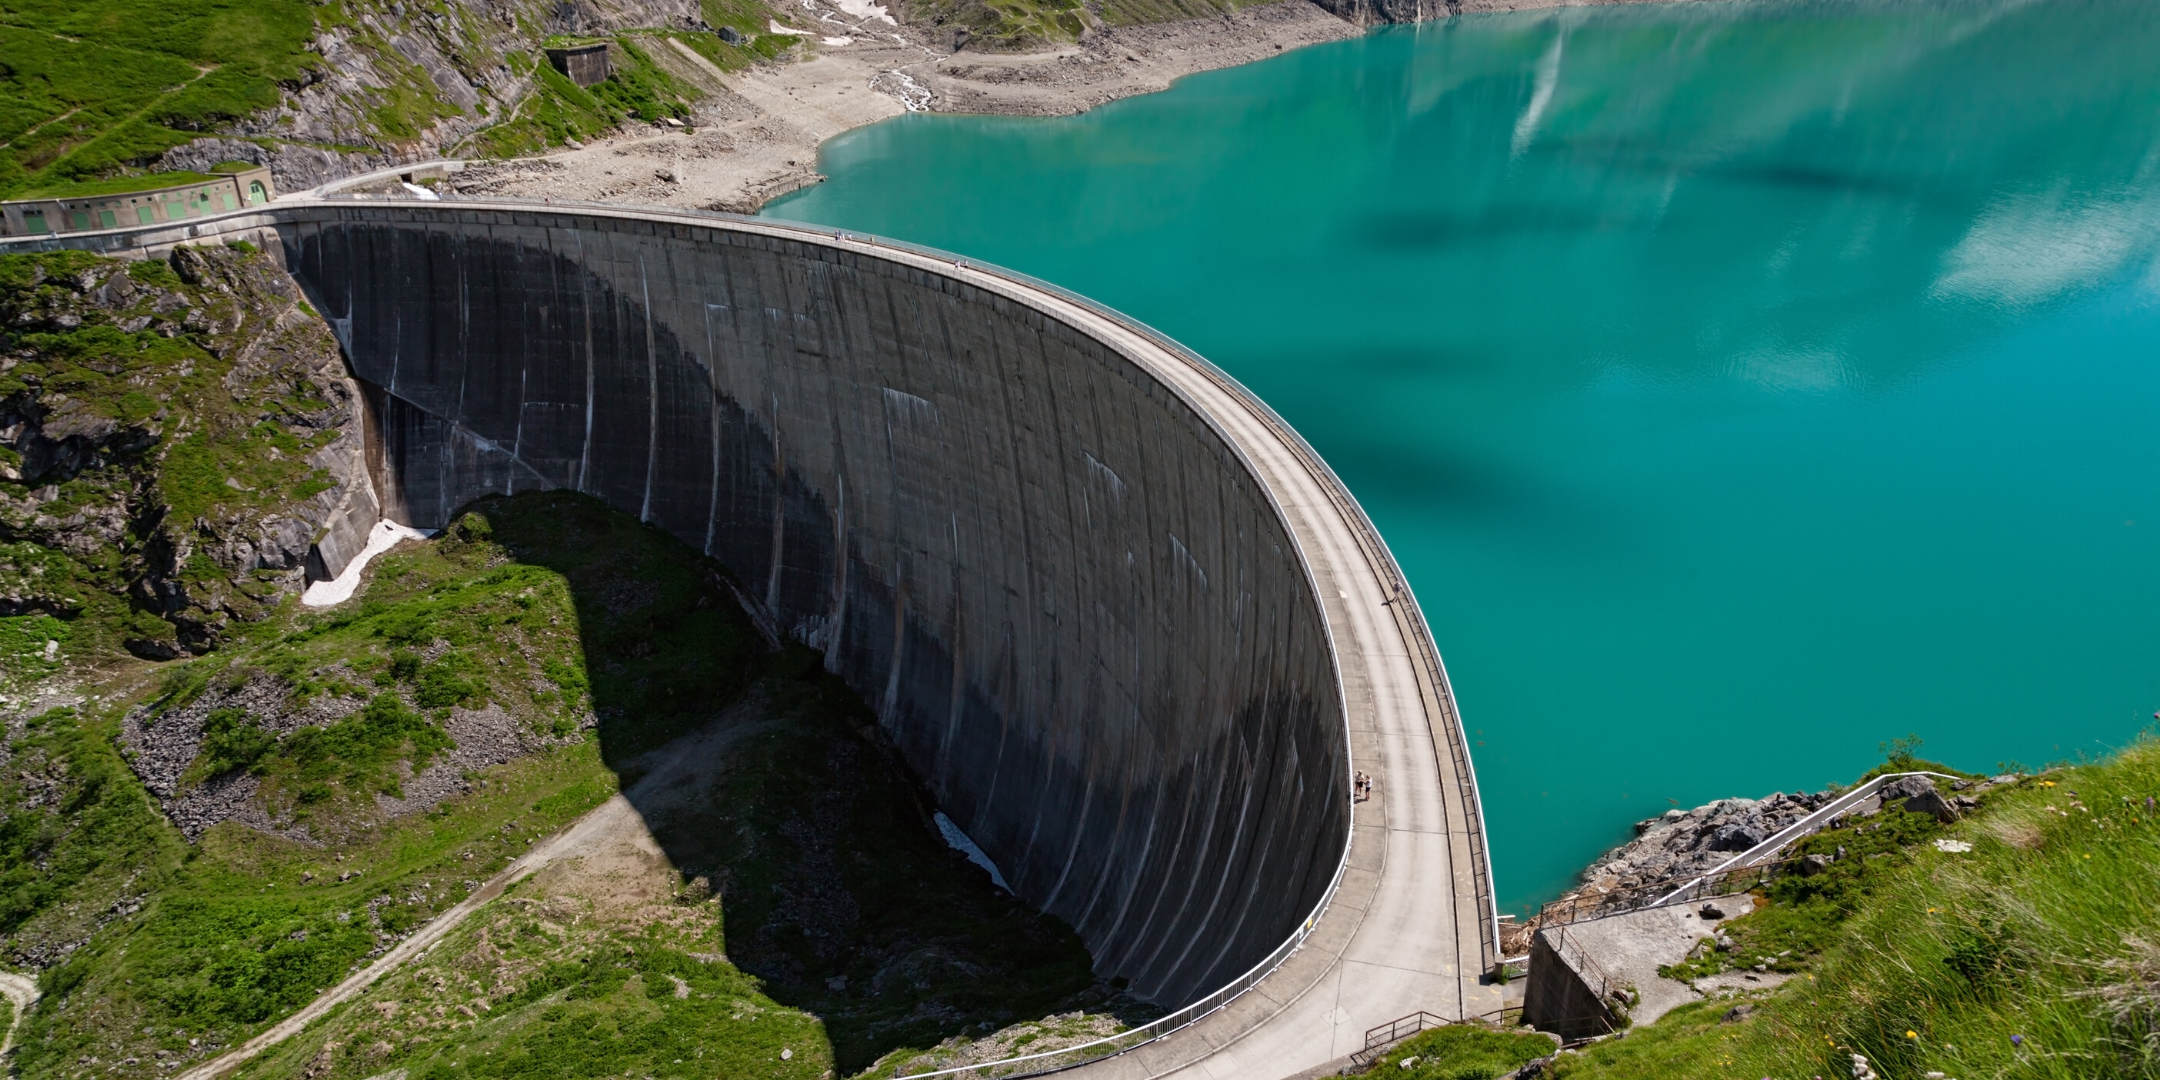 Critical Infrastructure Security - Dams.